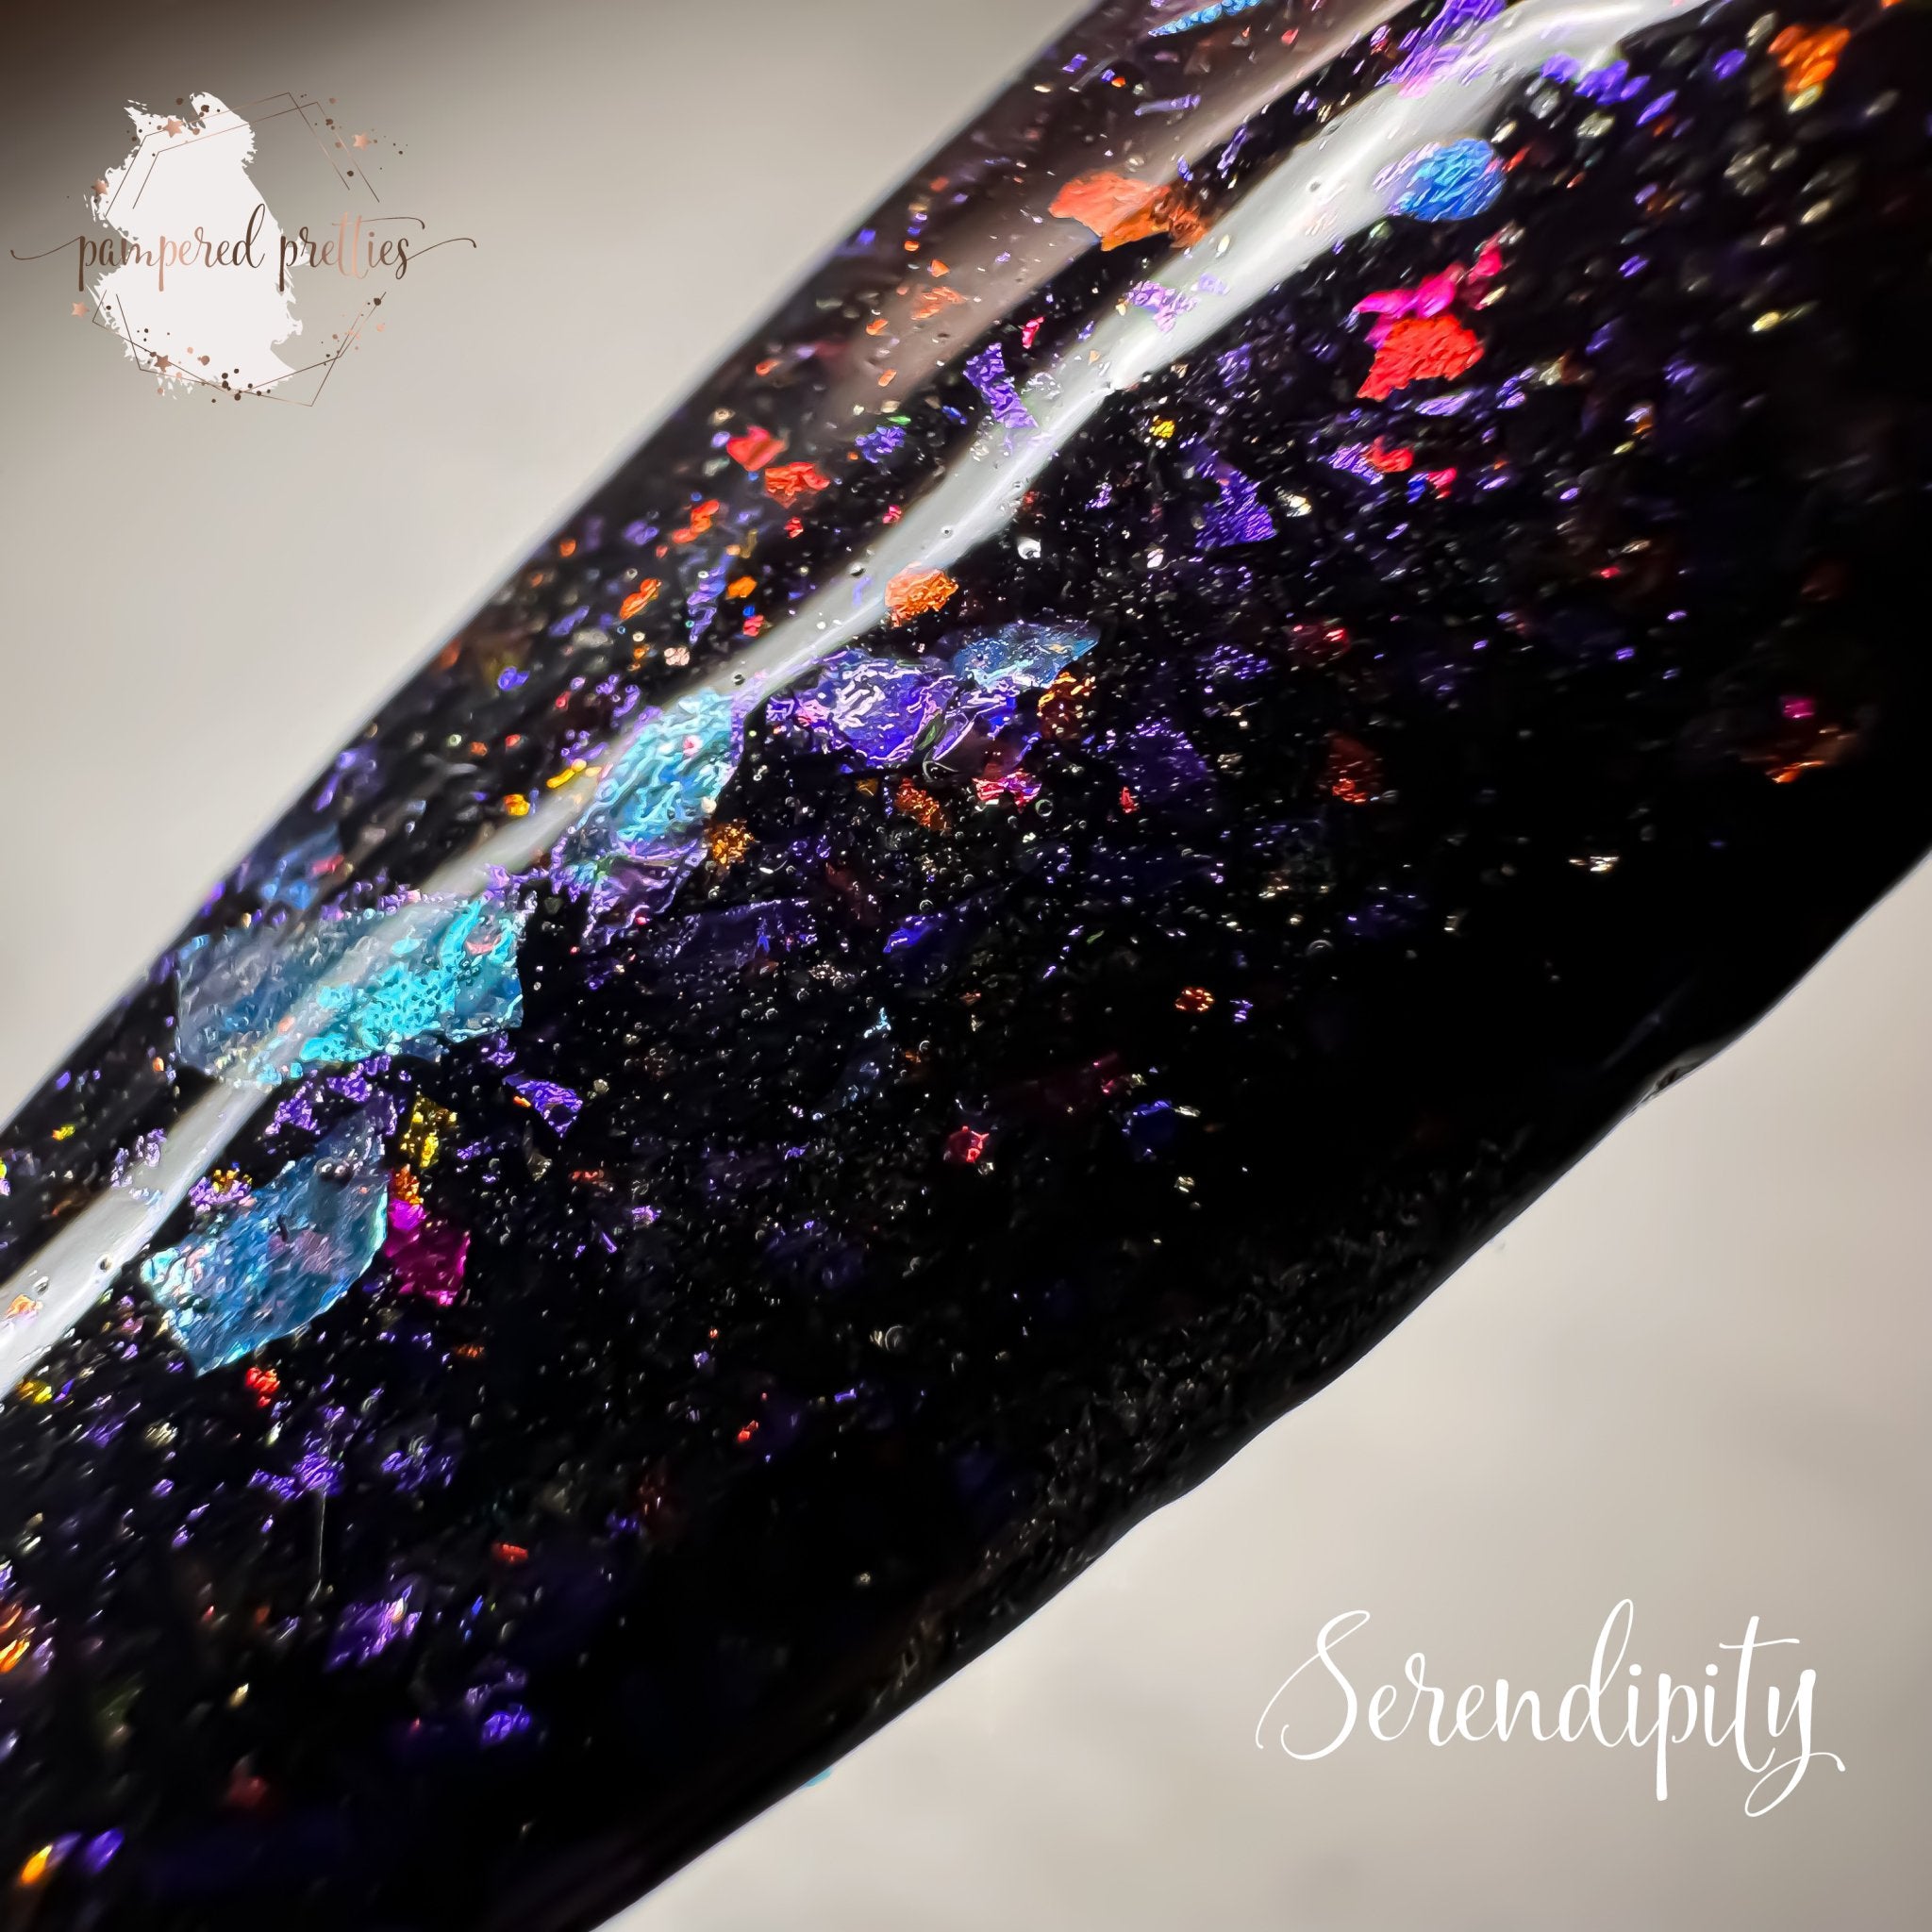 Serendipity - Pampered Pretties